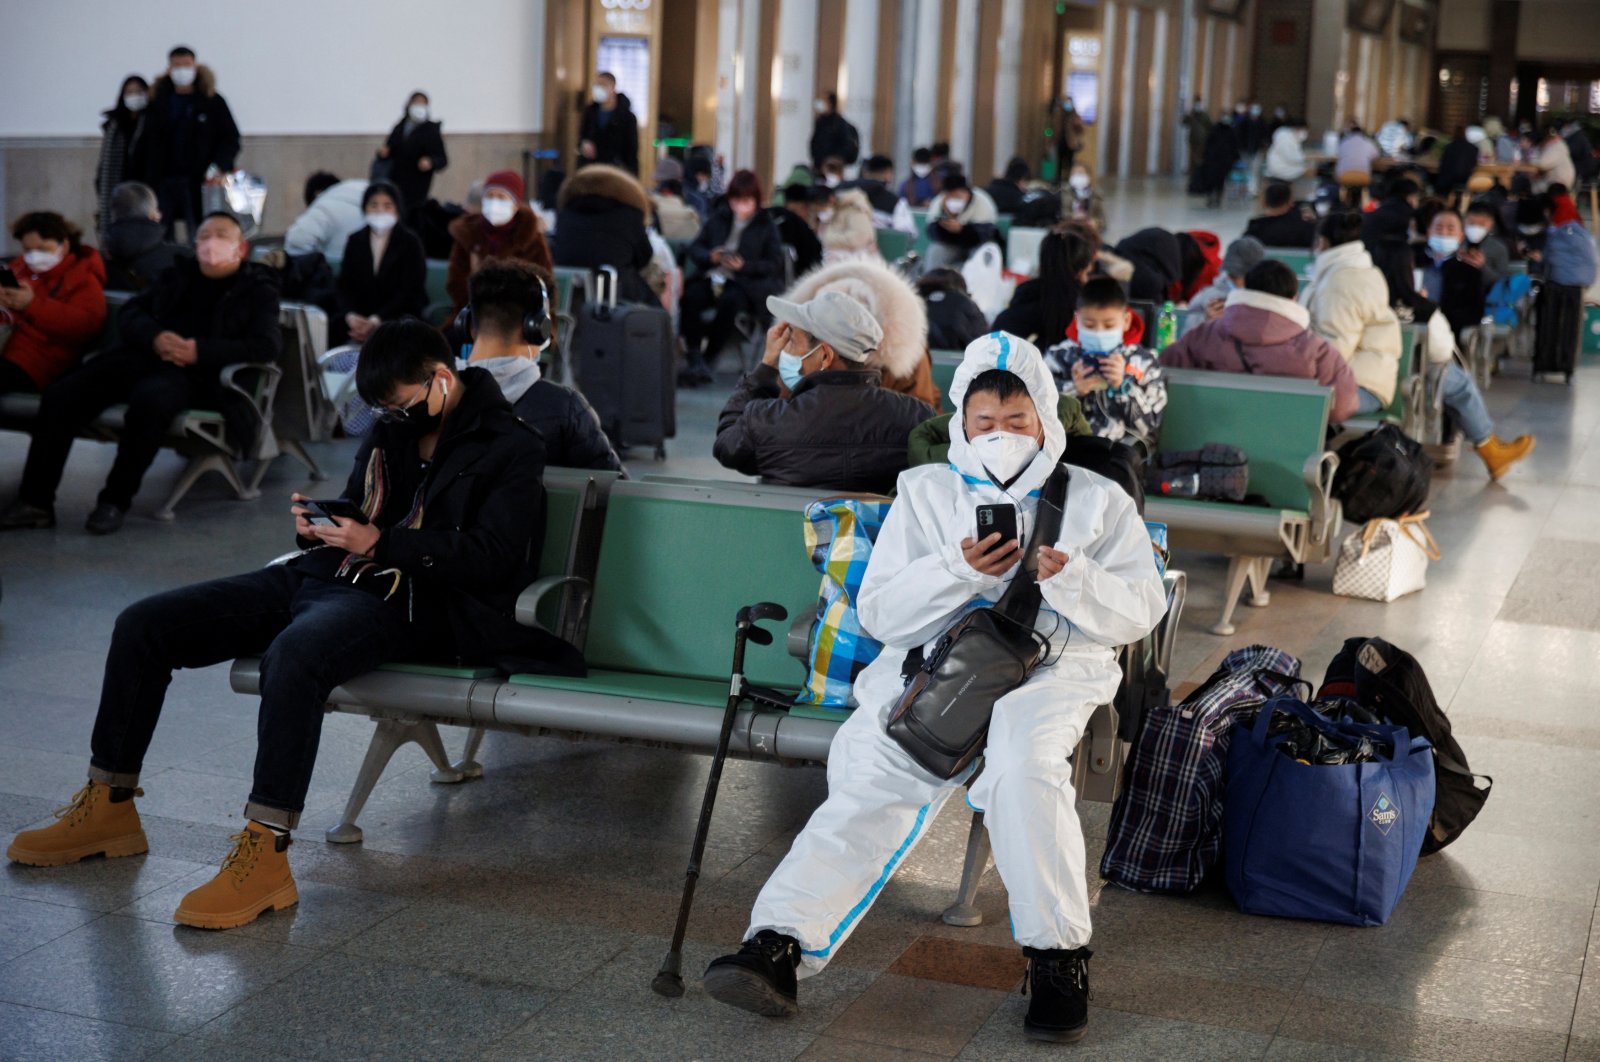 A person wearing a protective suit sits in Beijing Railway Station as passengers wait to board a train to travel for Spring Festival ahead of Chinese Lunar New Year festivities after China lifted its COVID-19 restrictions, Beijing, China, Jan. 20, 2023. (Reuters Photo)